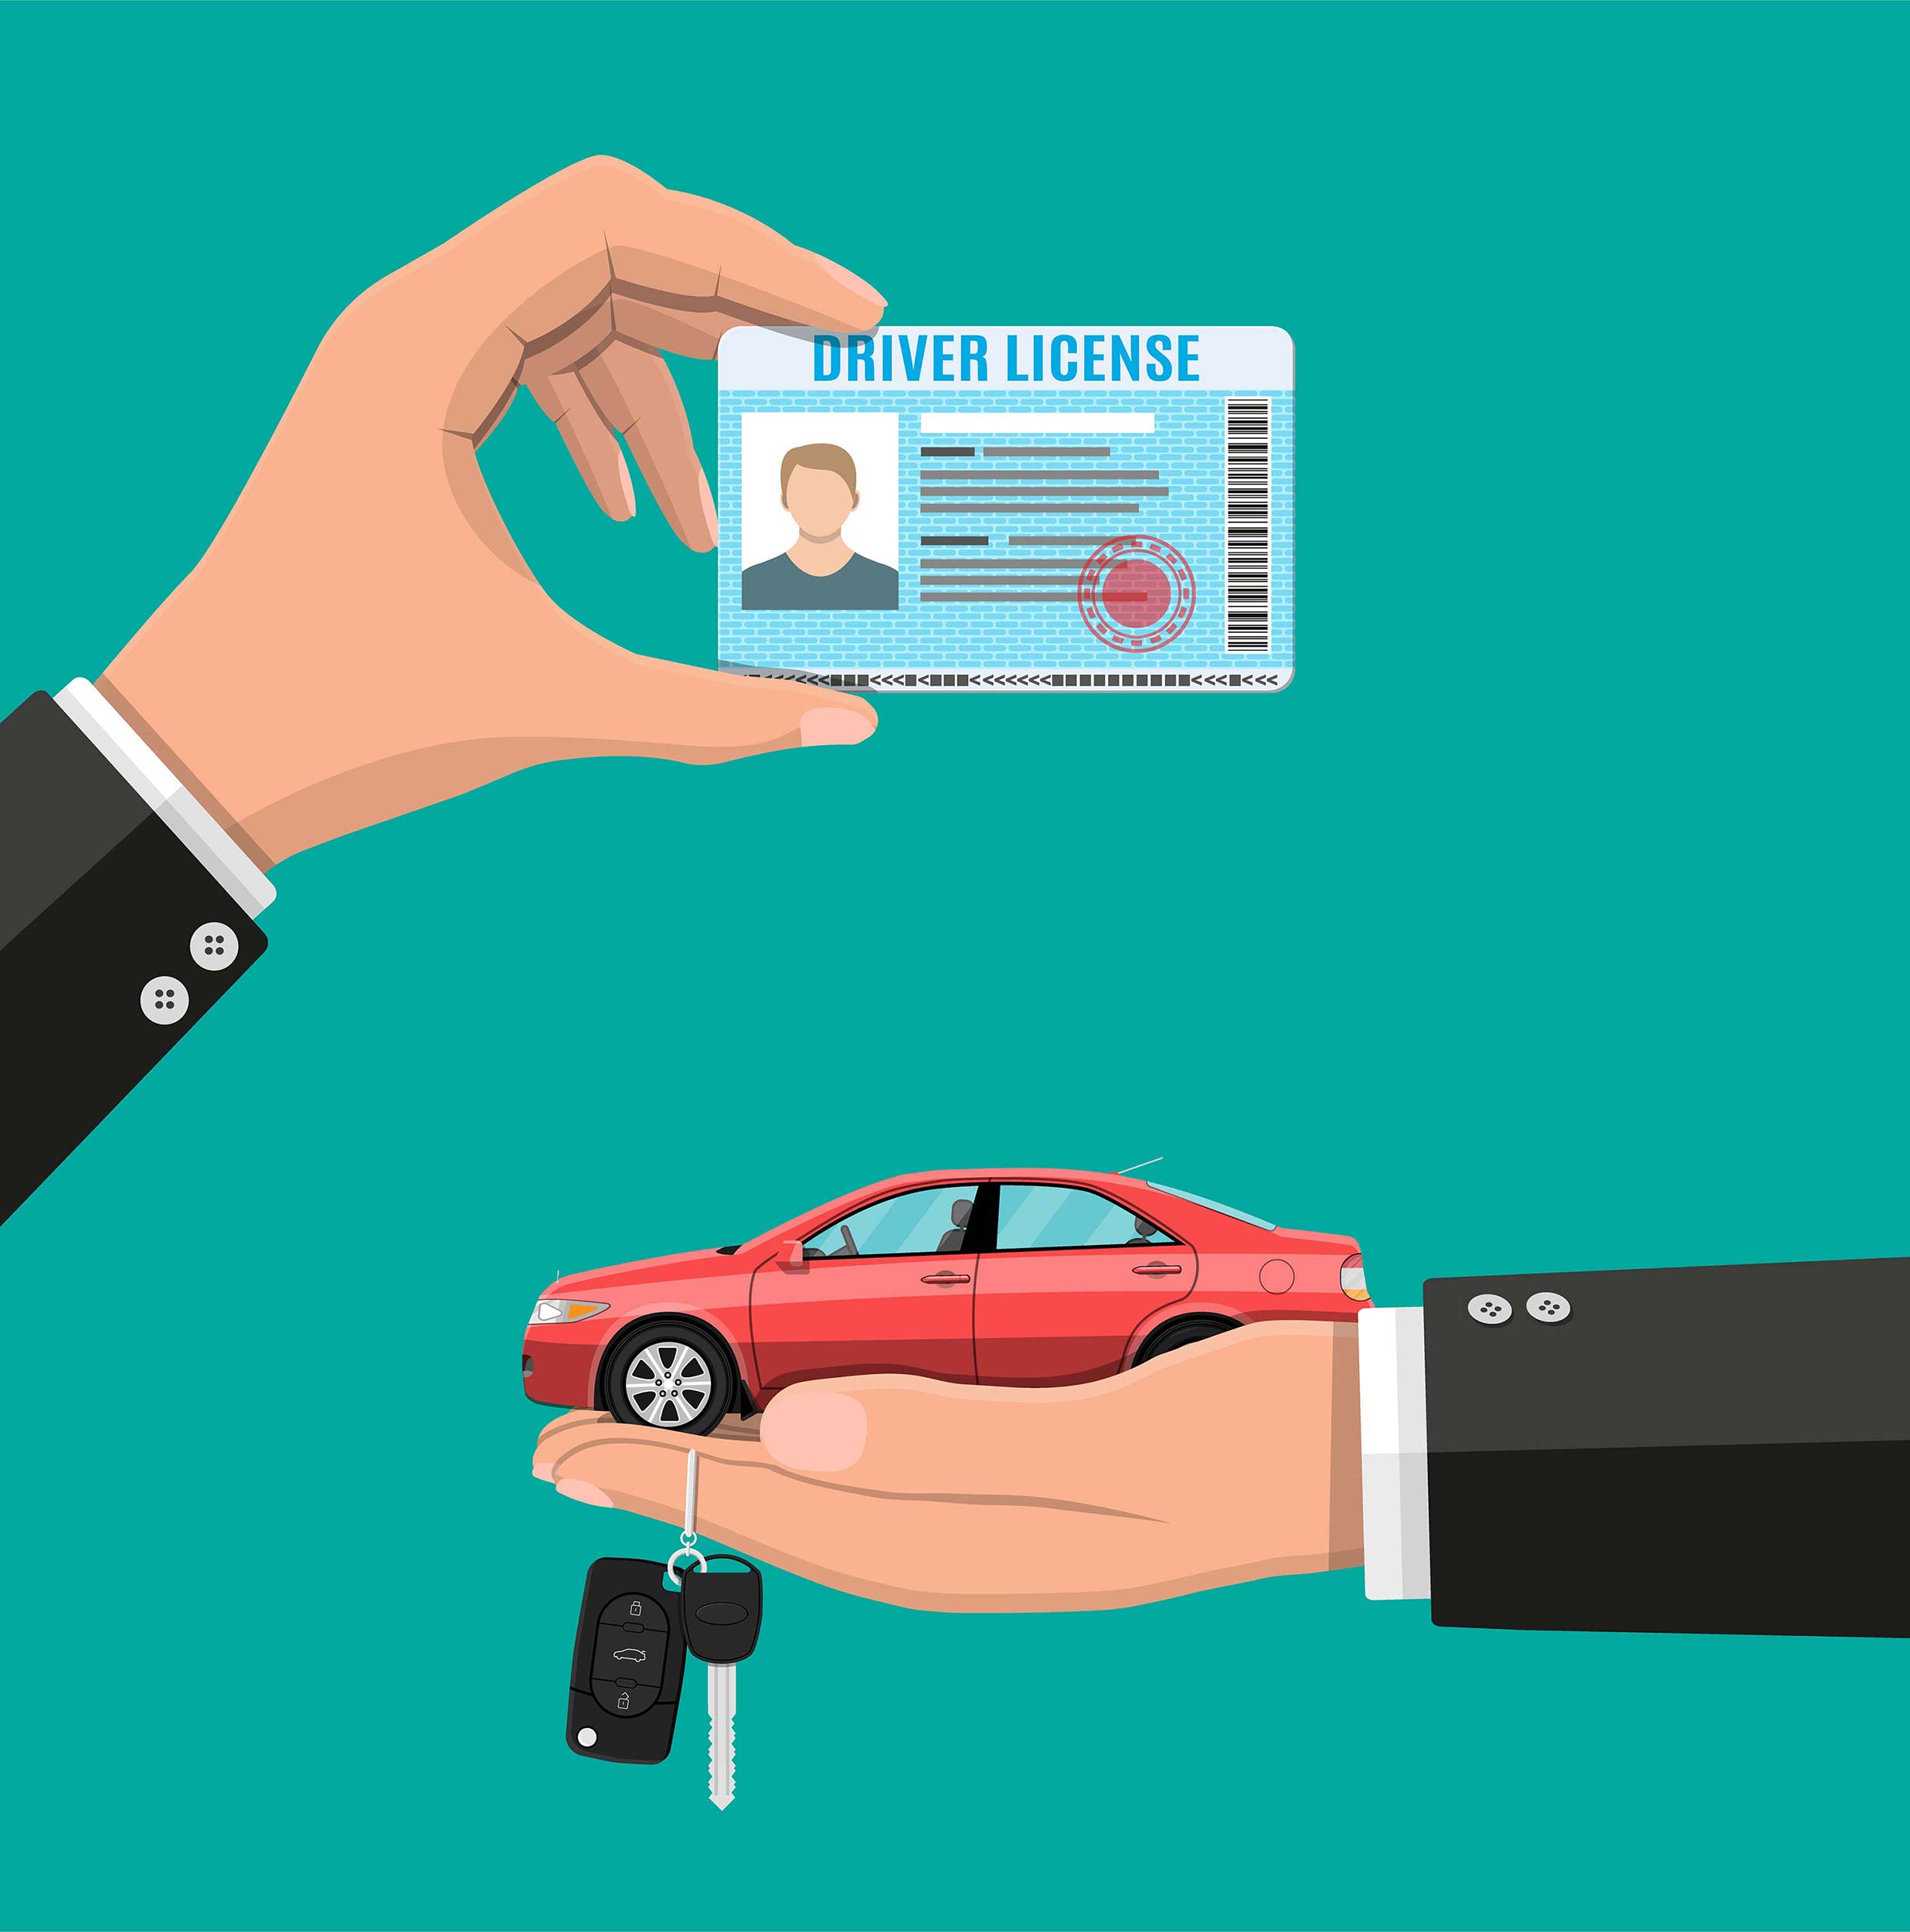 What are the different types of driving license in India?